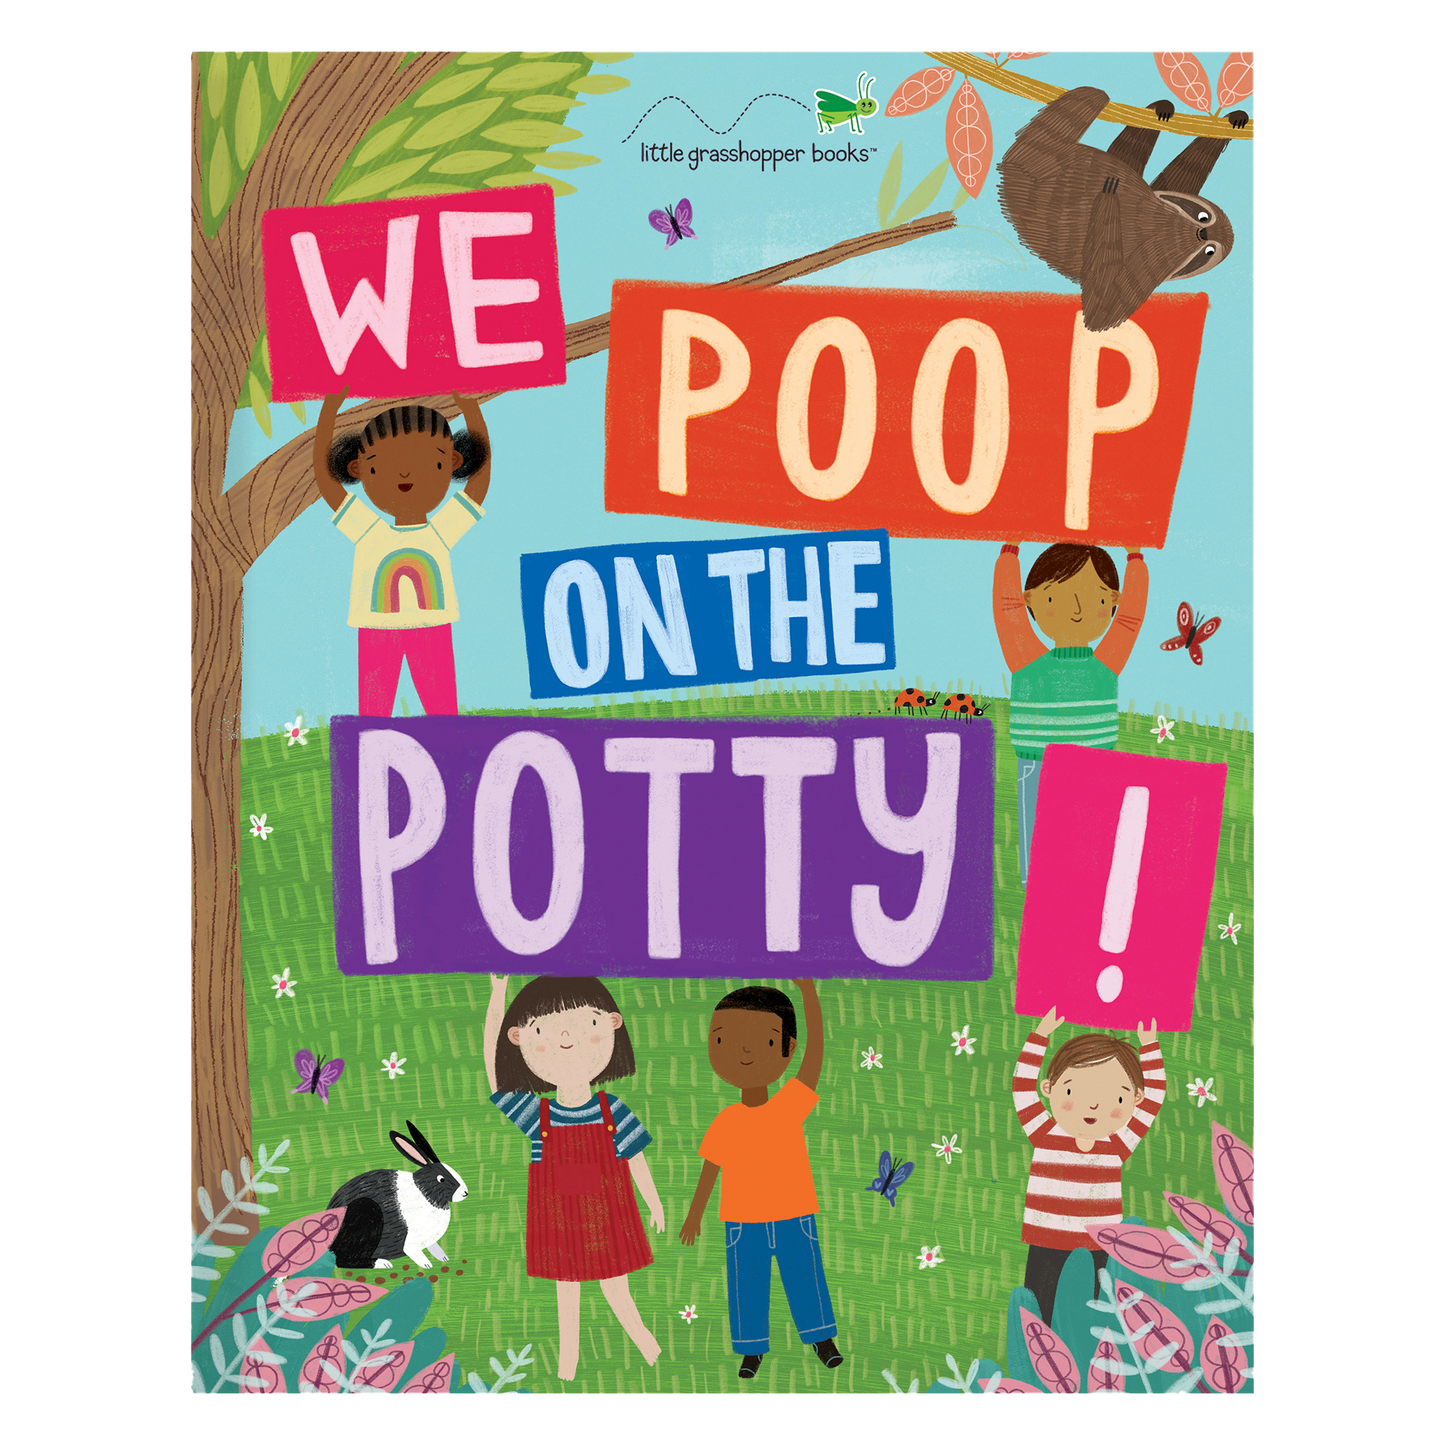 We Poop on the Potty! Mom's Choice Awards Gold Award Recipient